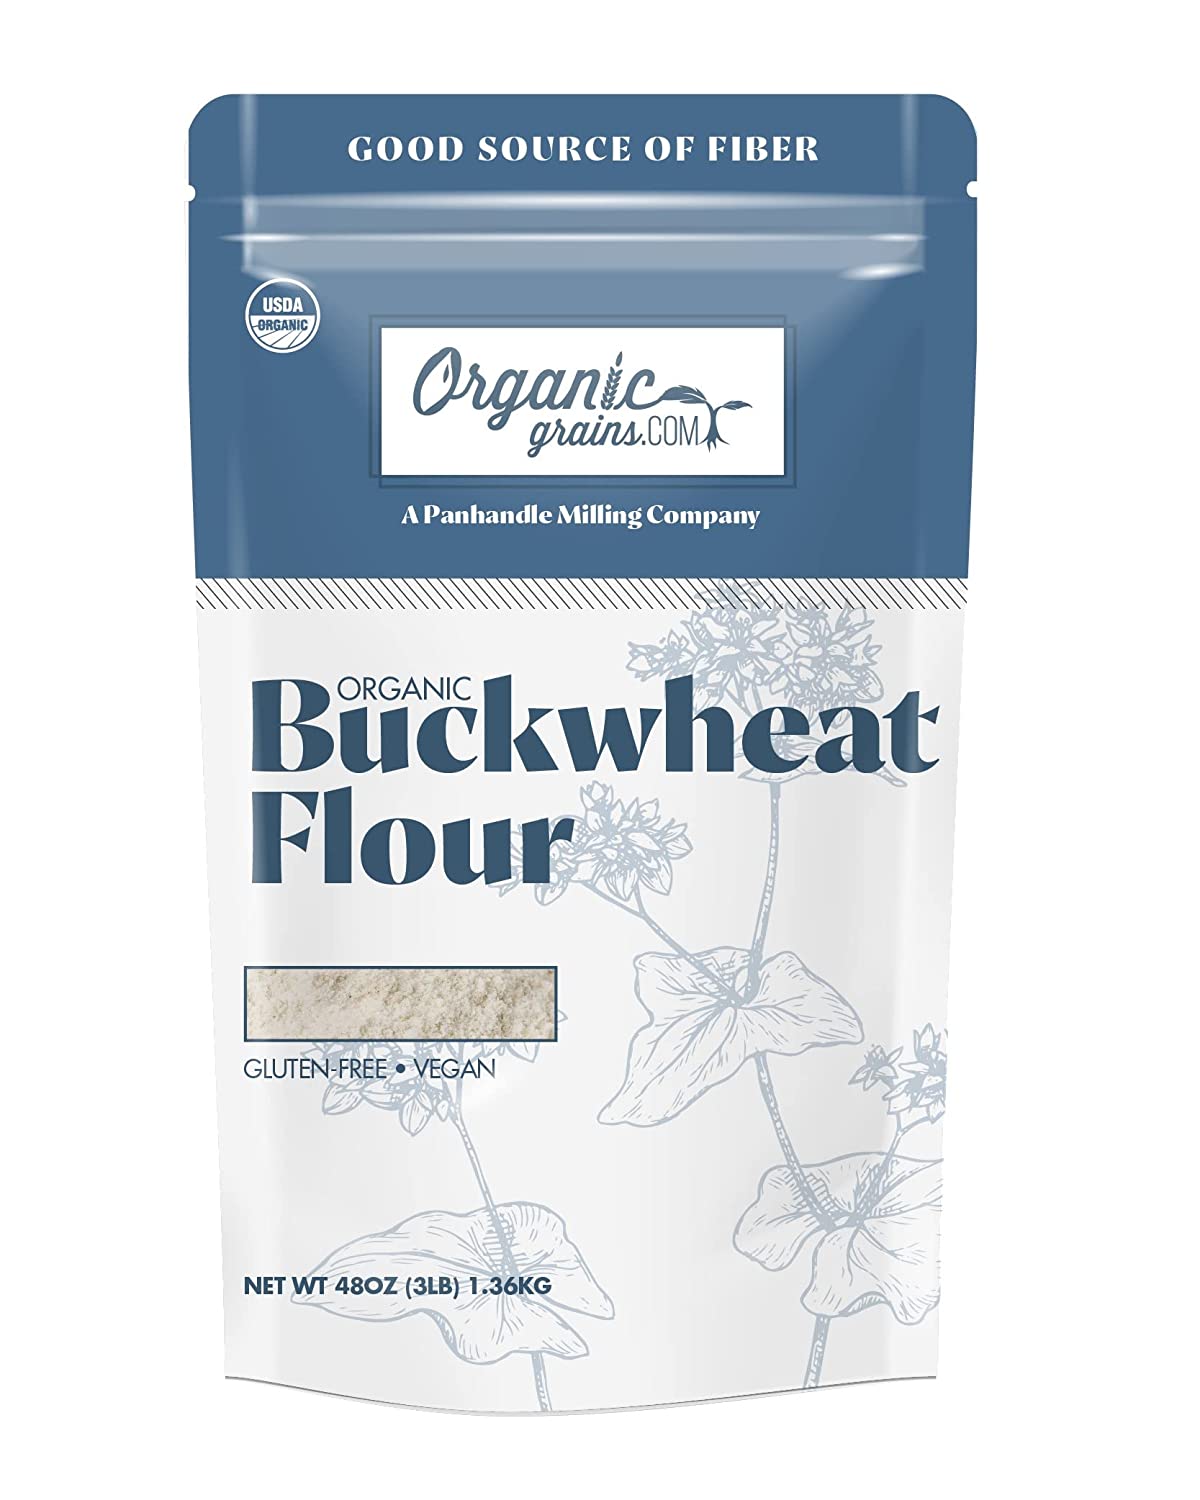 Buckwheat flour gluten-free and healthy option for substituting all-purpose flour